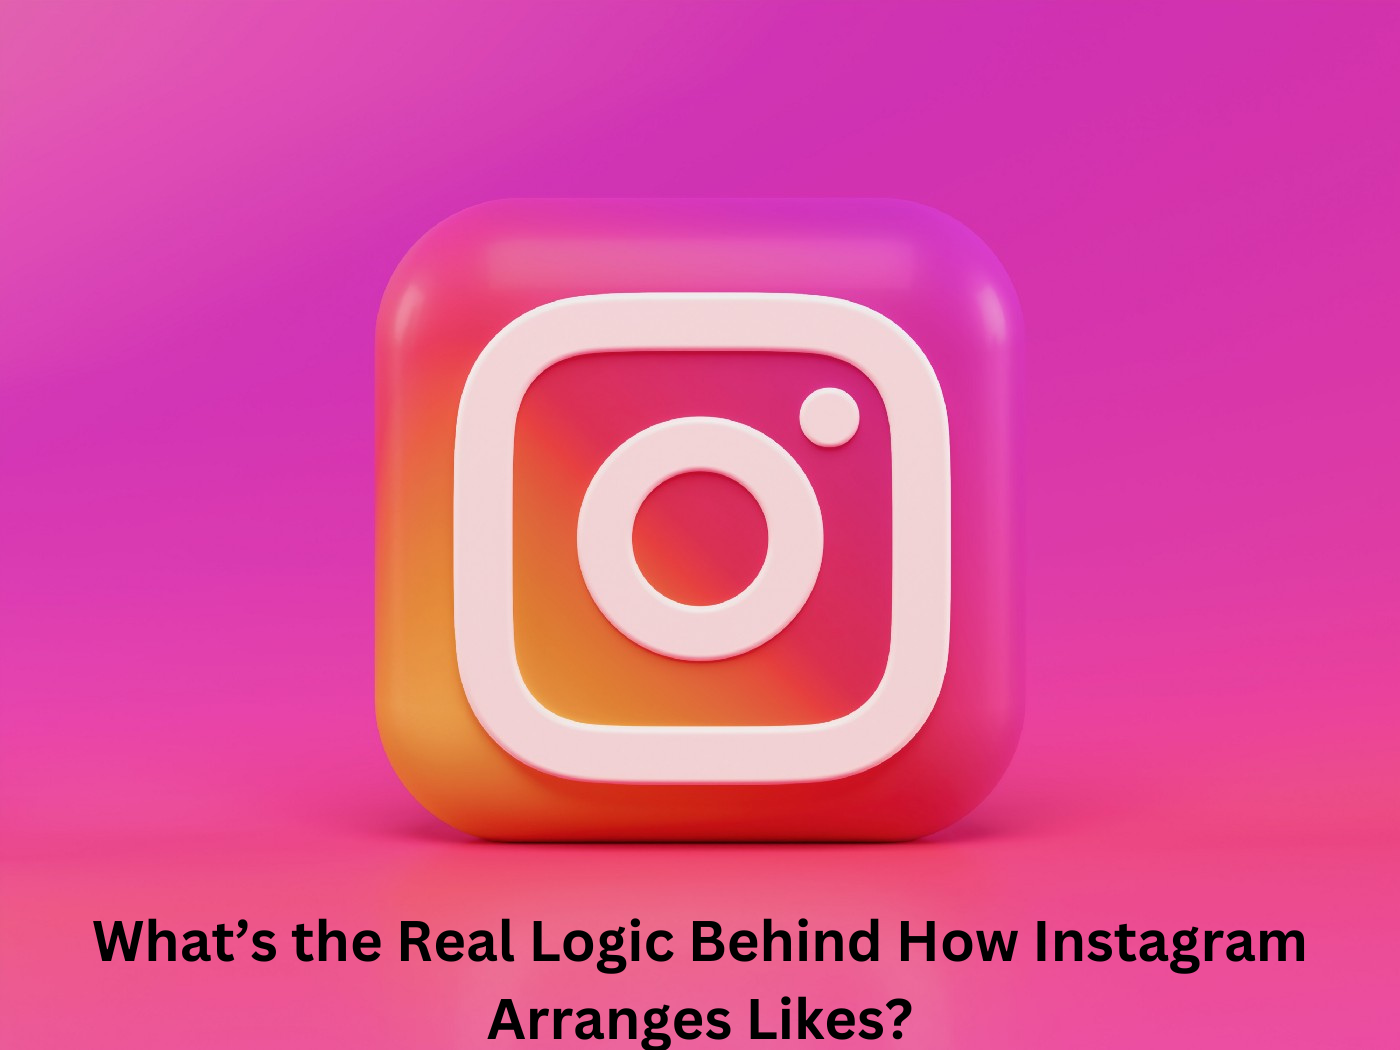 What’s the Real Logic Behind How Instagram Arranges Likes?